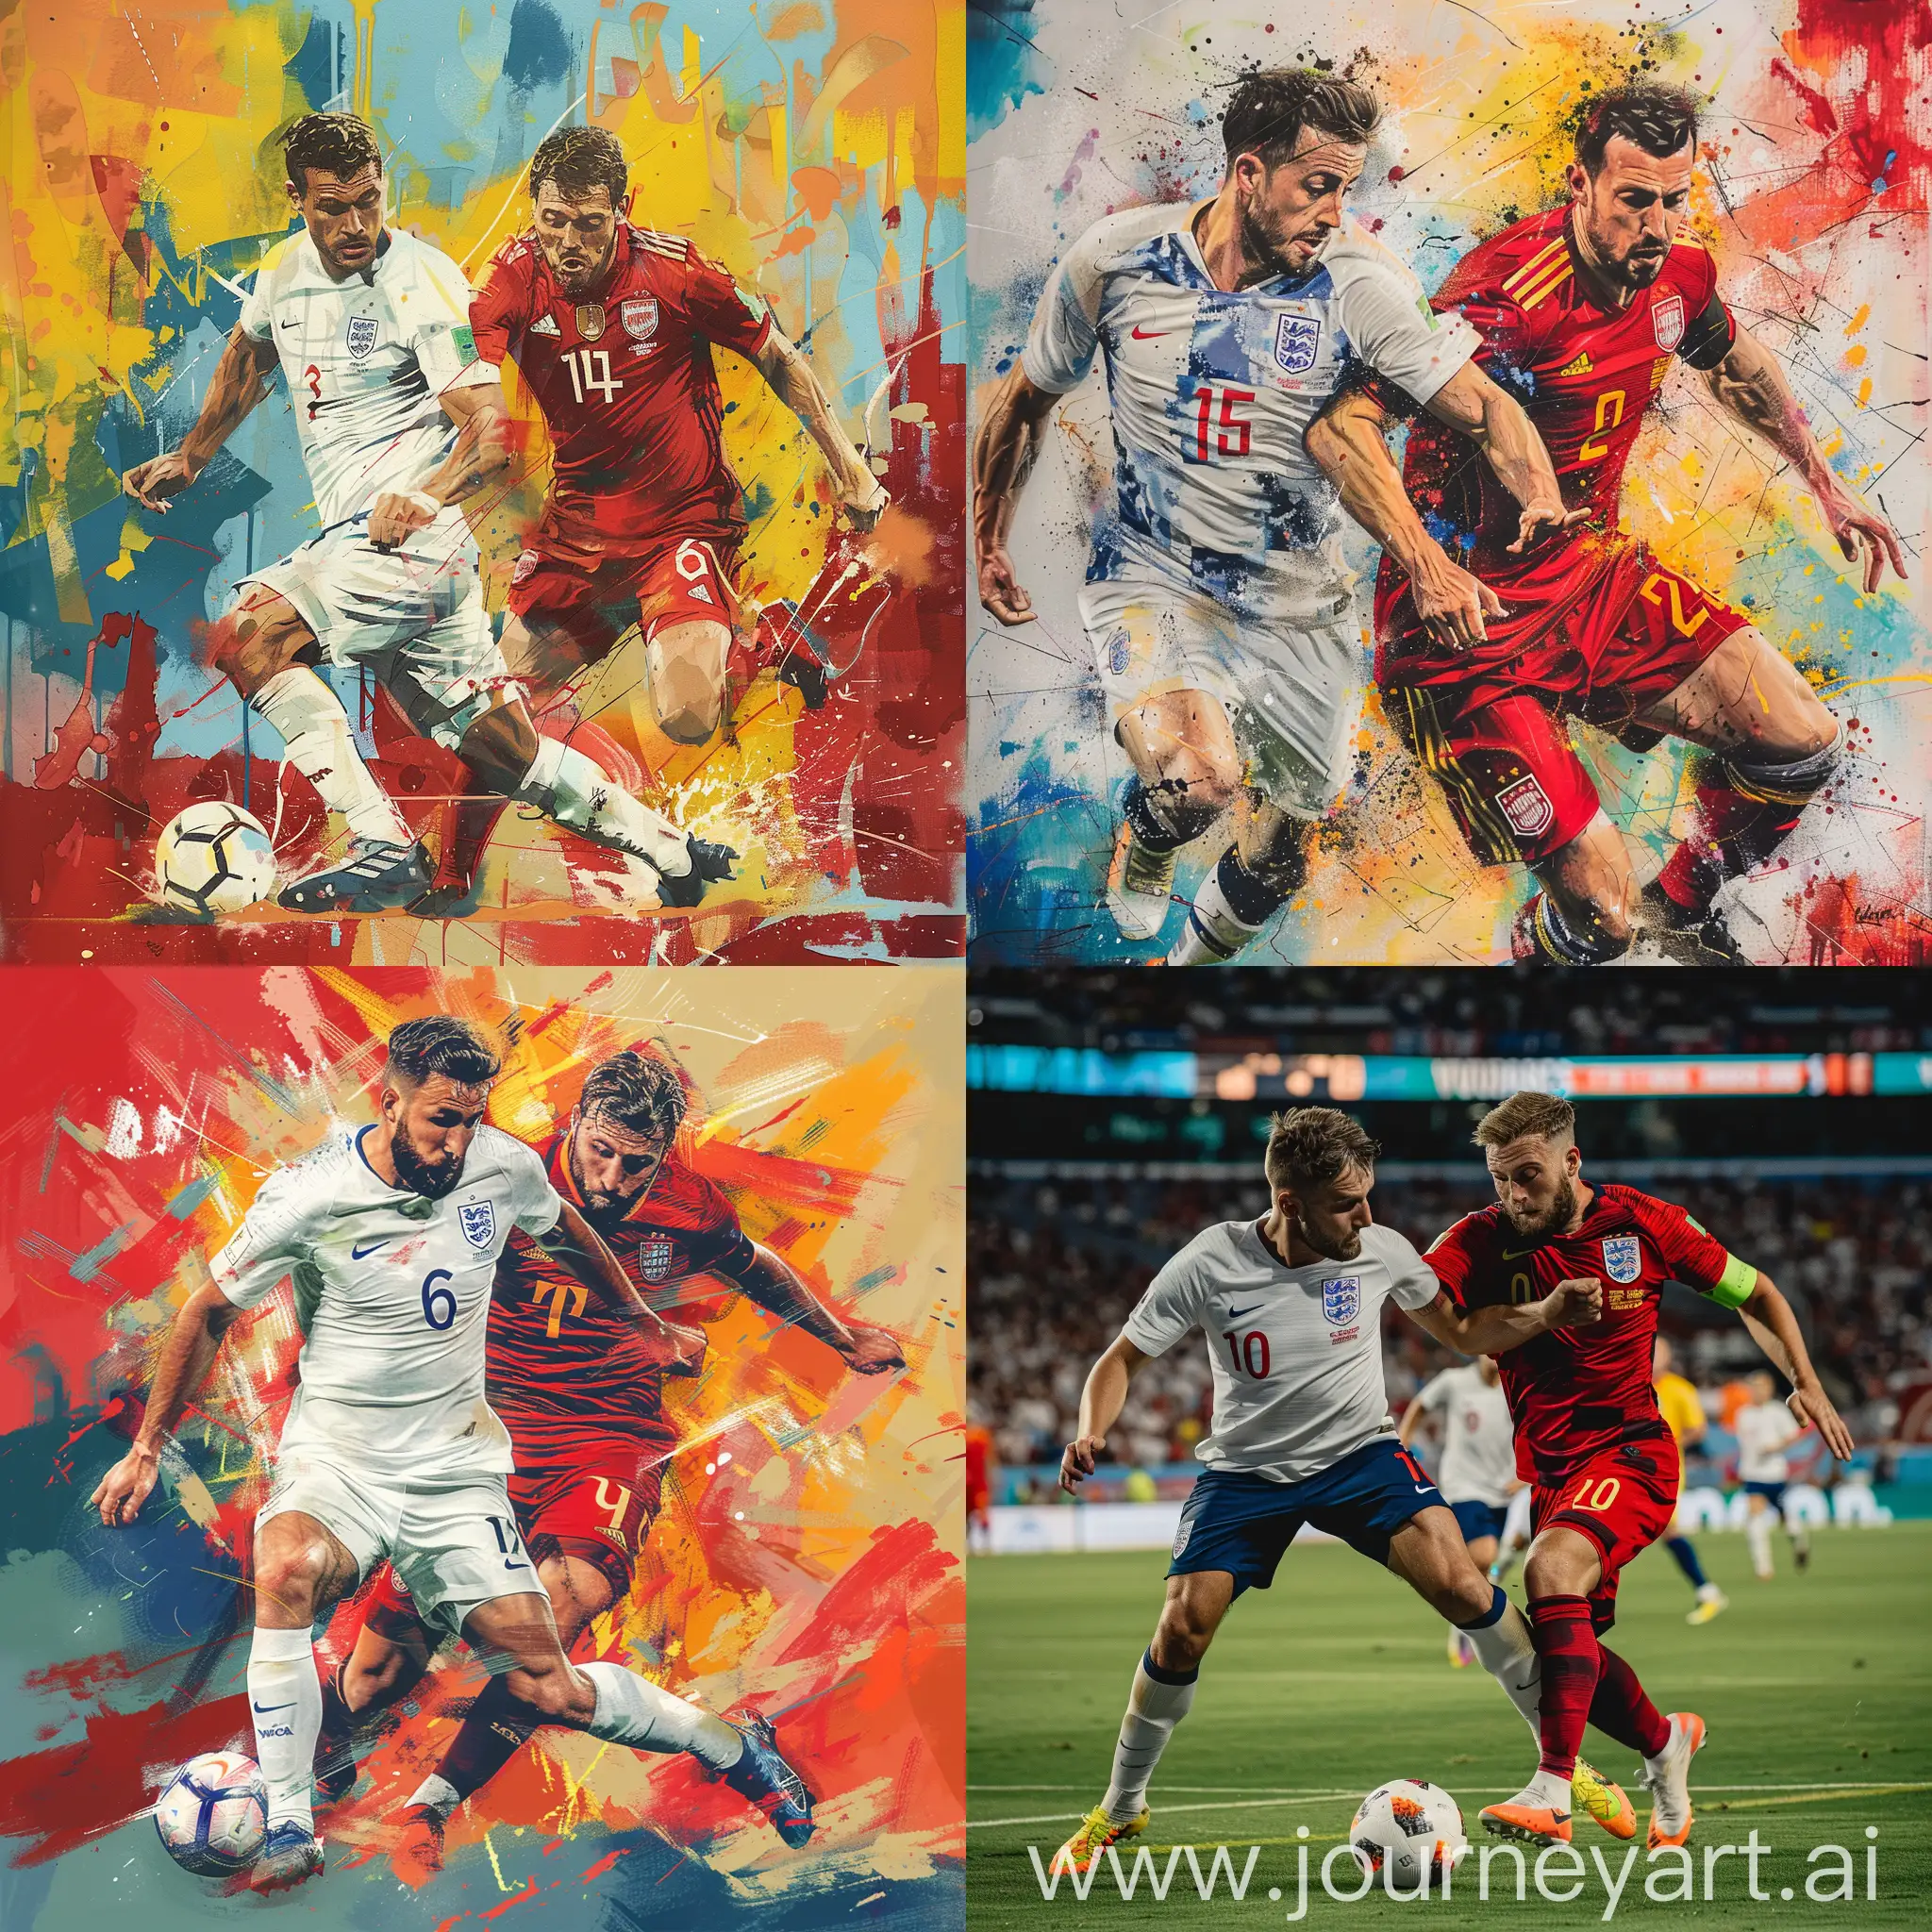 Intense-Football-Match-England-vs-Spain-Clash-in-Action